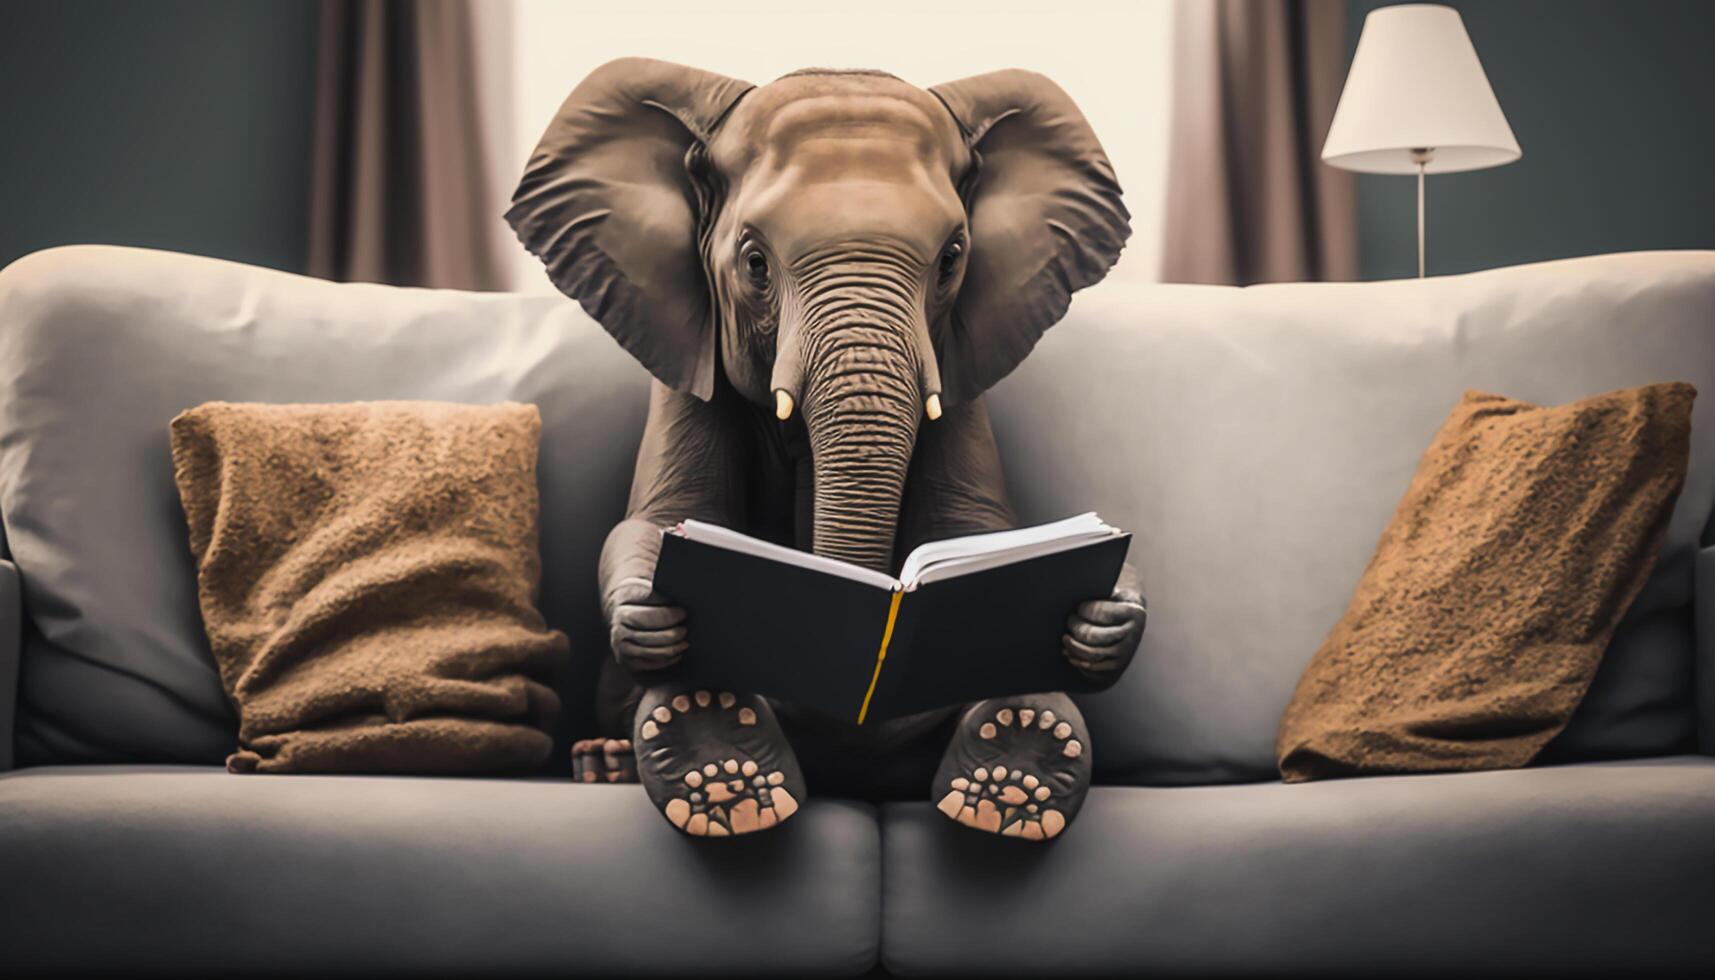 elephant reading book on sofa, learning and knowladge concept, photo